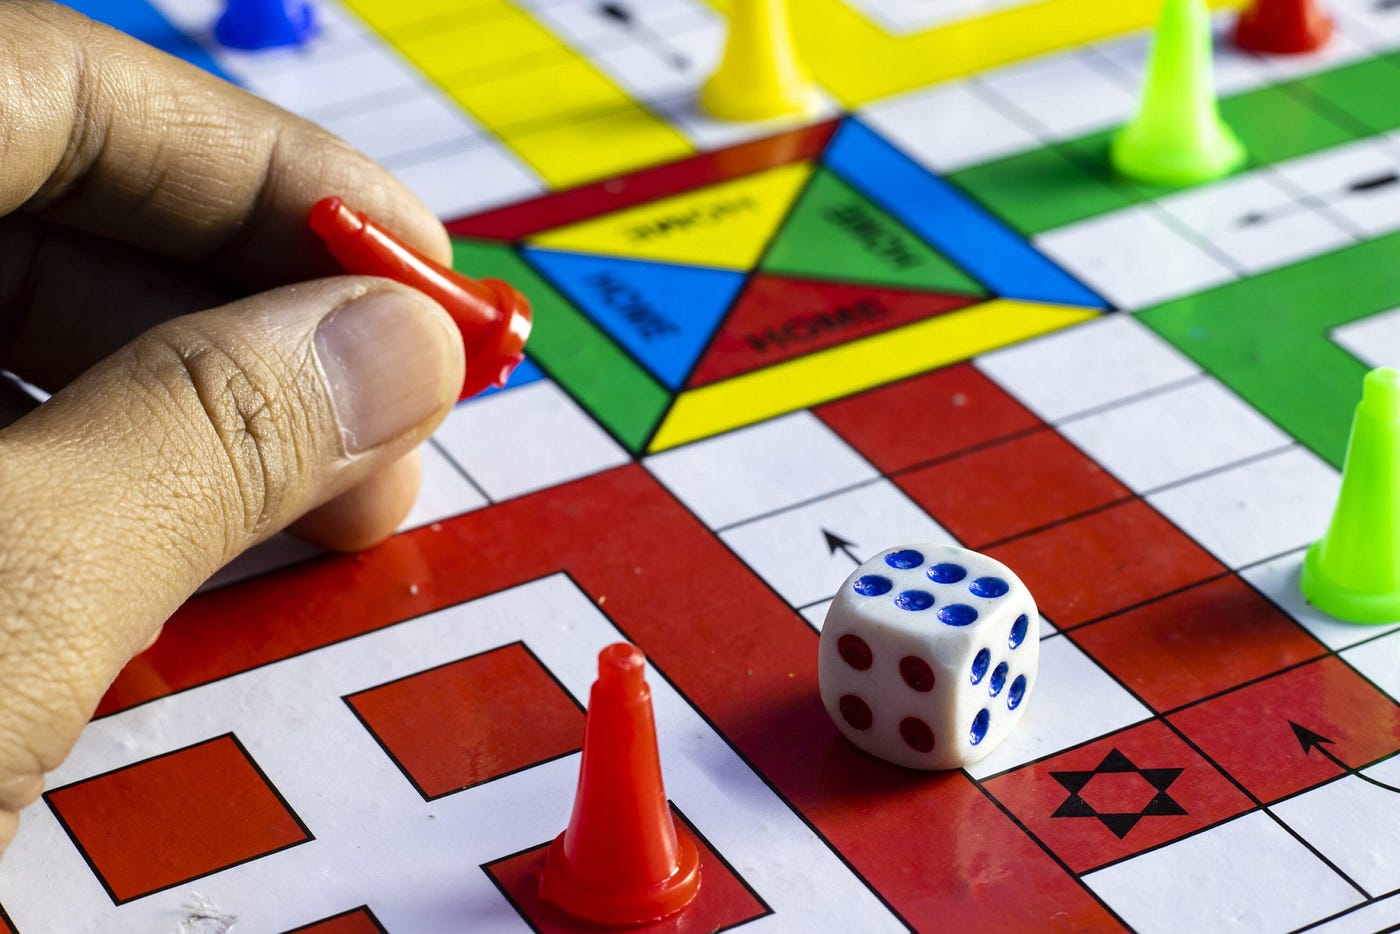 Online Ludo Game: How it Helps to Bond with Your Family & Friends?